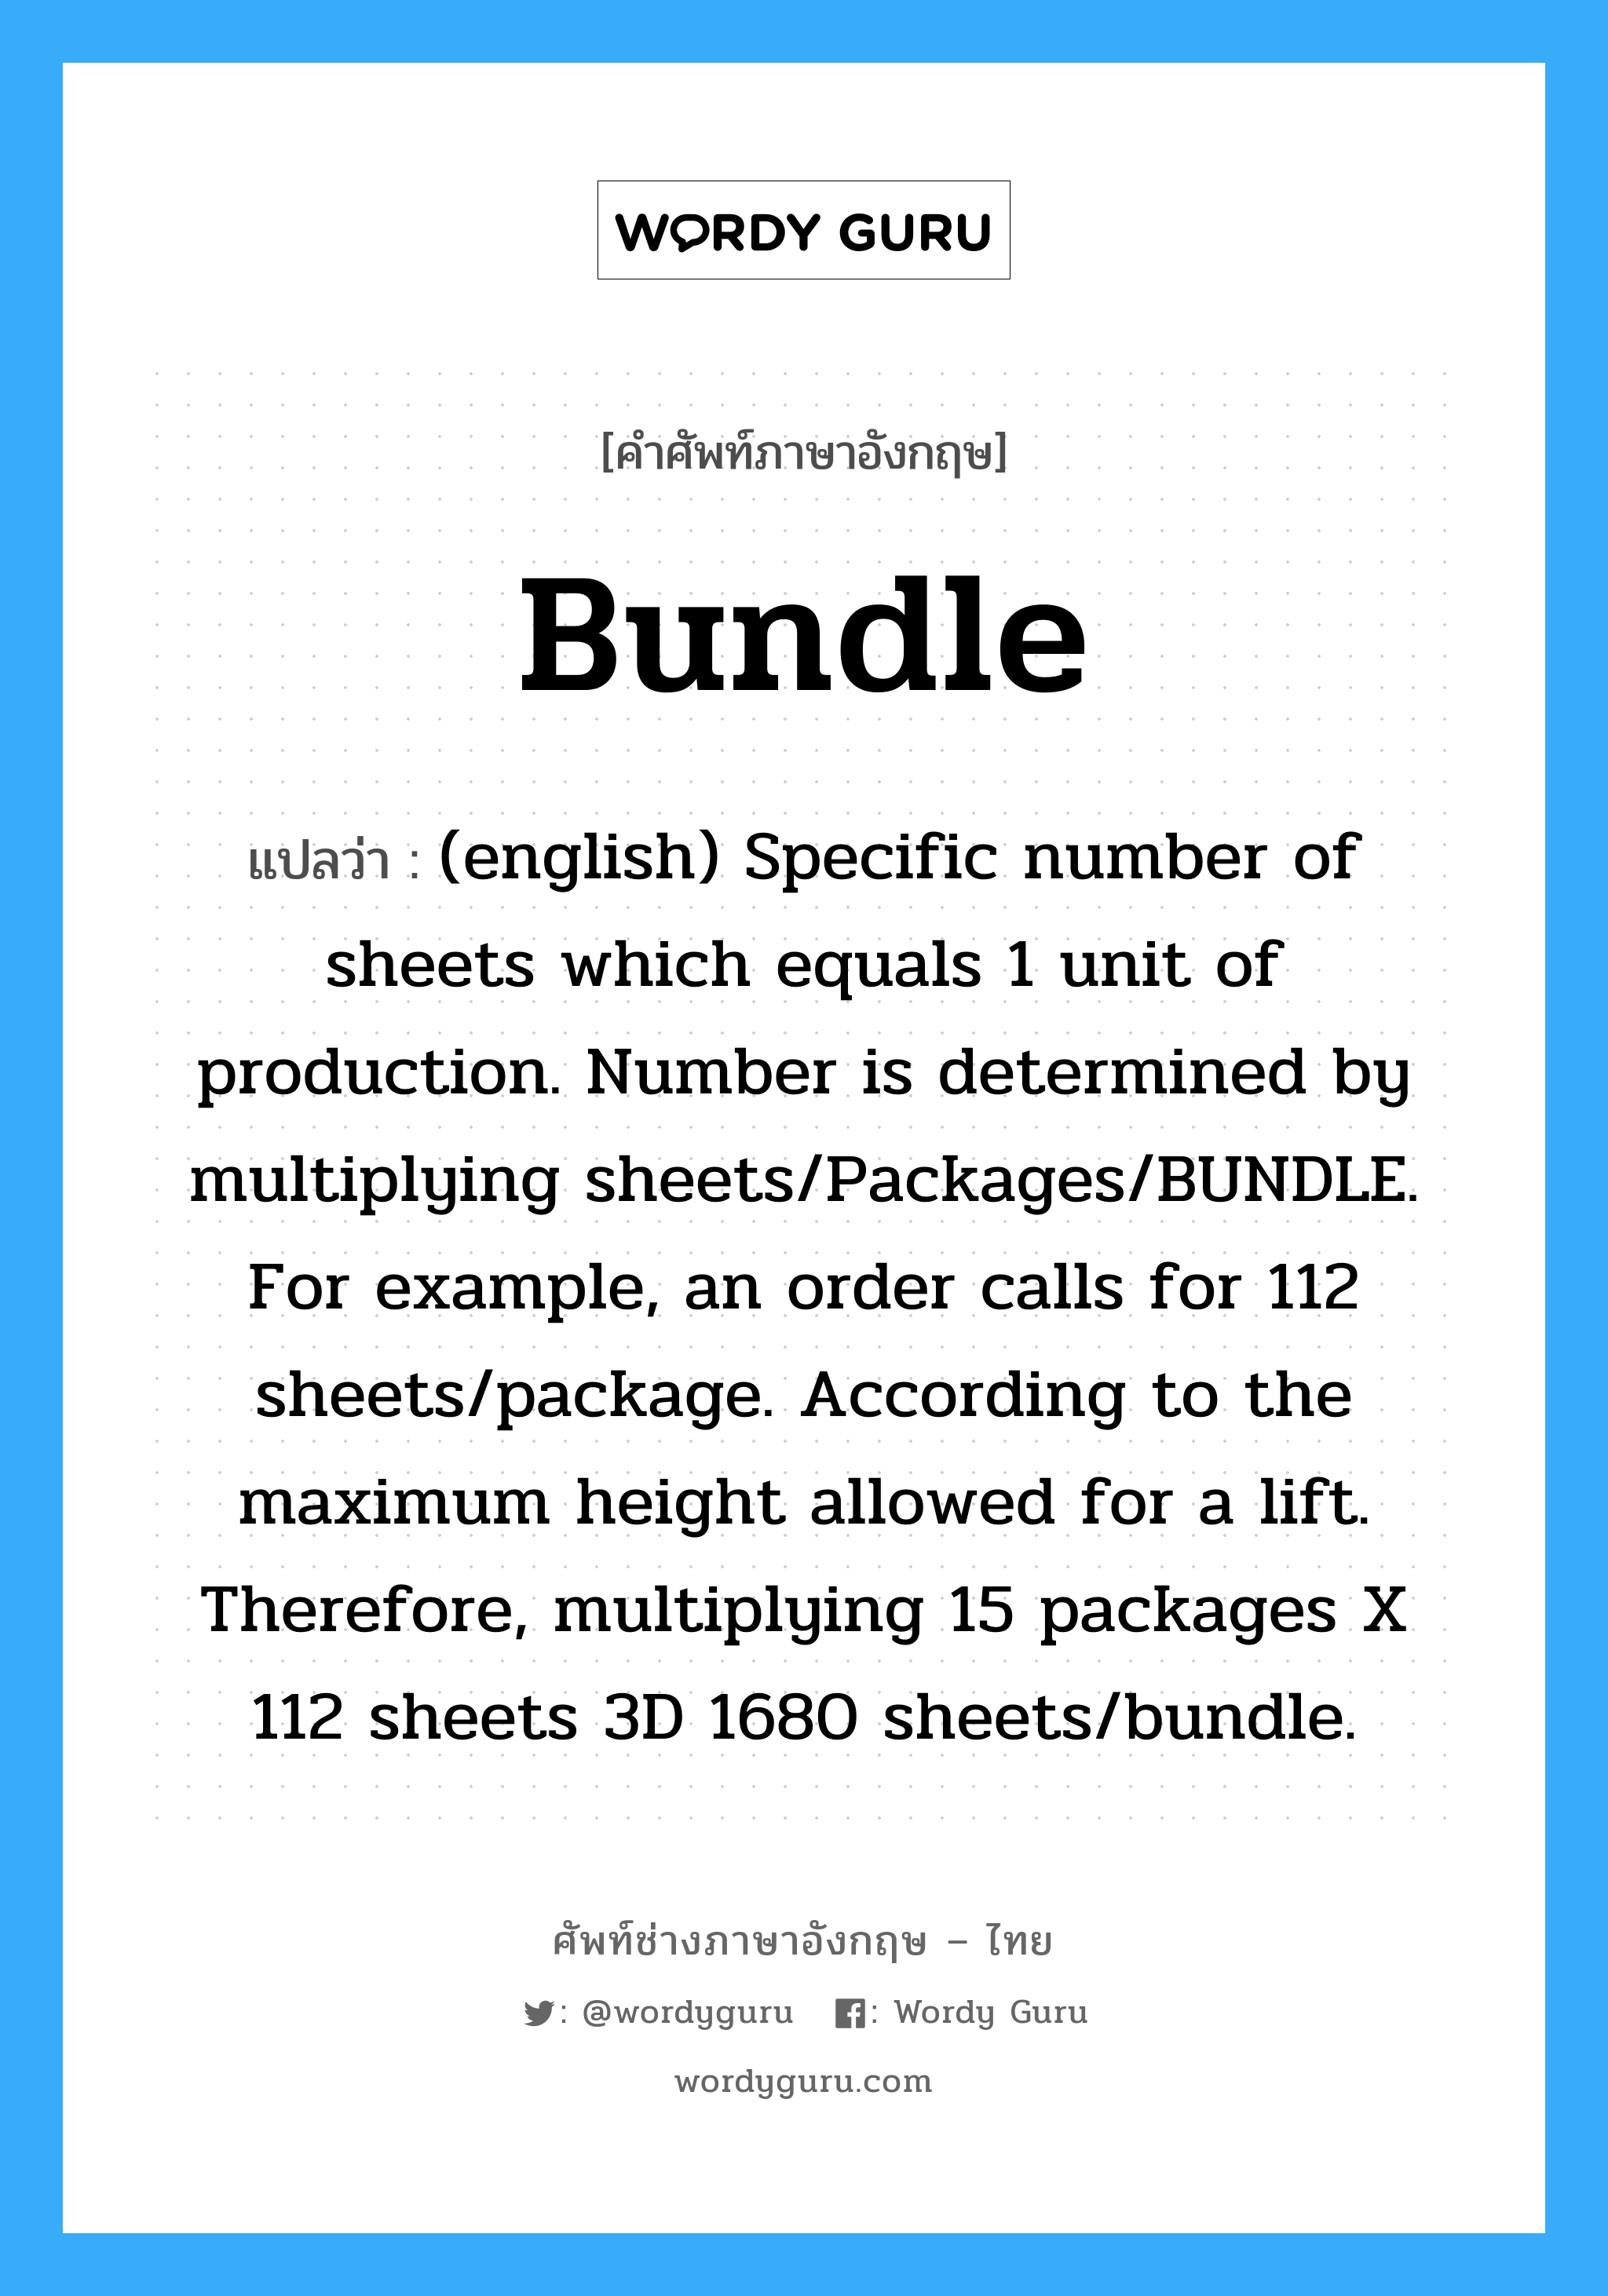 Bundle แปลว่า?, คำศัพท์ช่างภาษาอังกฤษ - ไทย Bundle คำศัพท์ภาษาอังกฤษ Bundle แปลว่า (english) Specific number of sheets which equals 1 unit of production. Number is determined by multiplying sheets/Packages/BUNDLE. For example, an order calls for 112 sheets/package. According to the maximum height allowed for a lift. Therefore, multiplying 15 packages X 112 sheets 3D 1680 sheets/bundle.